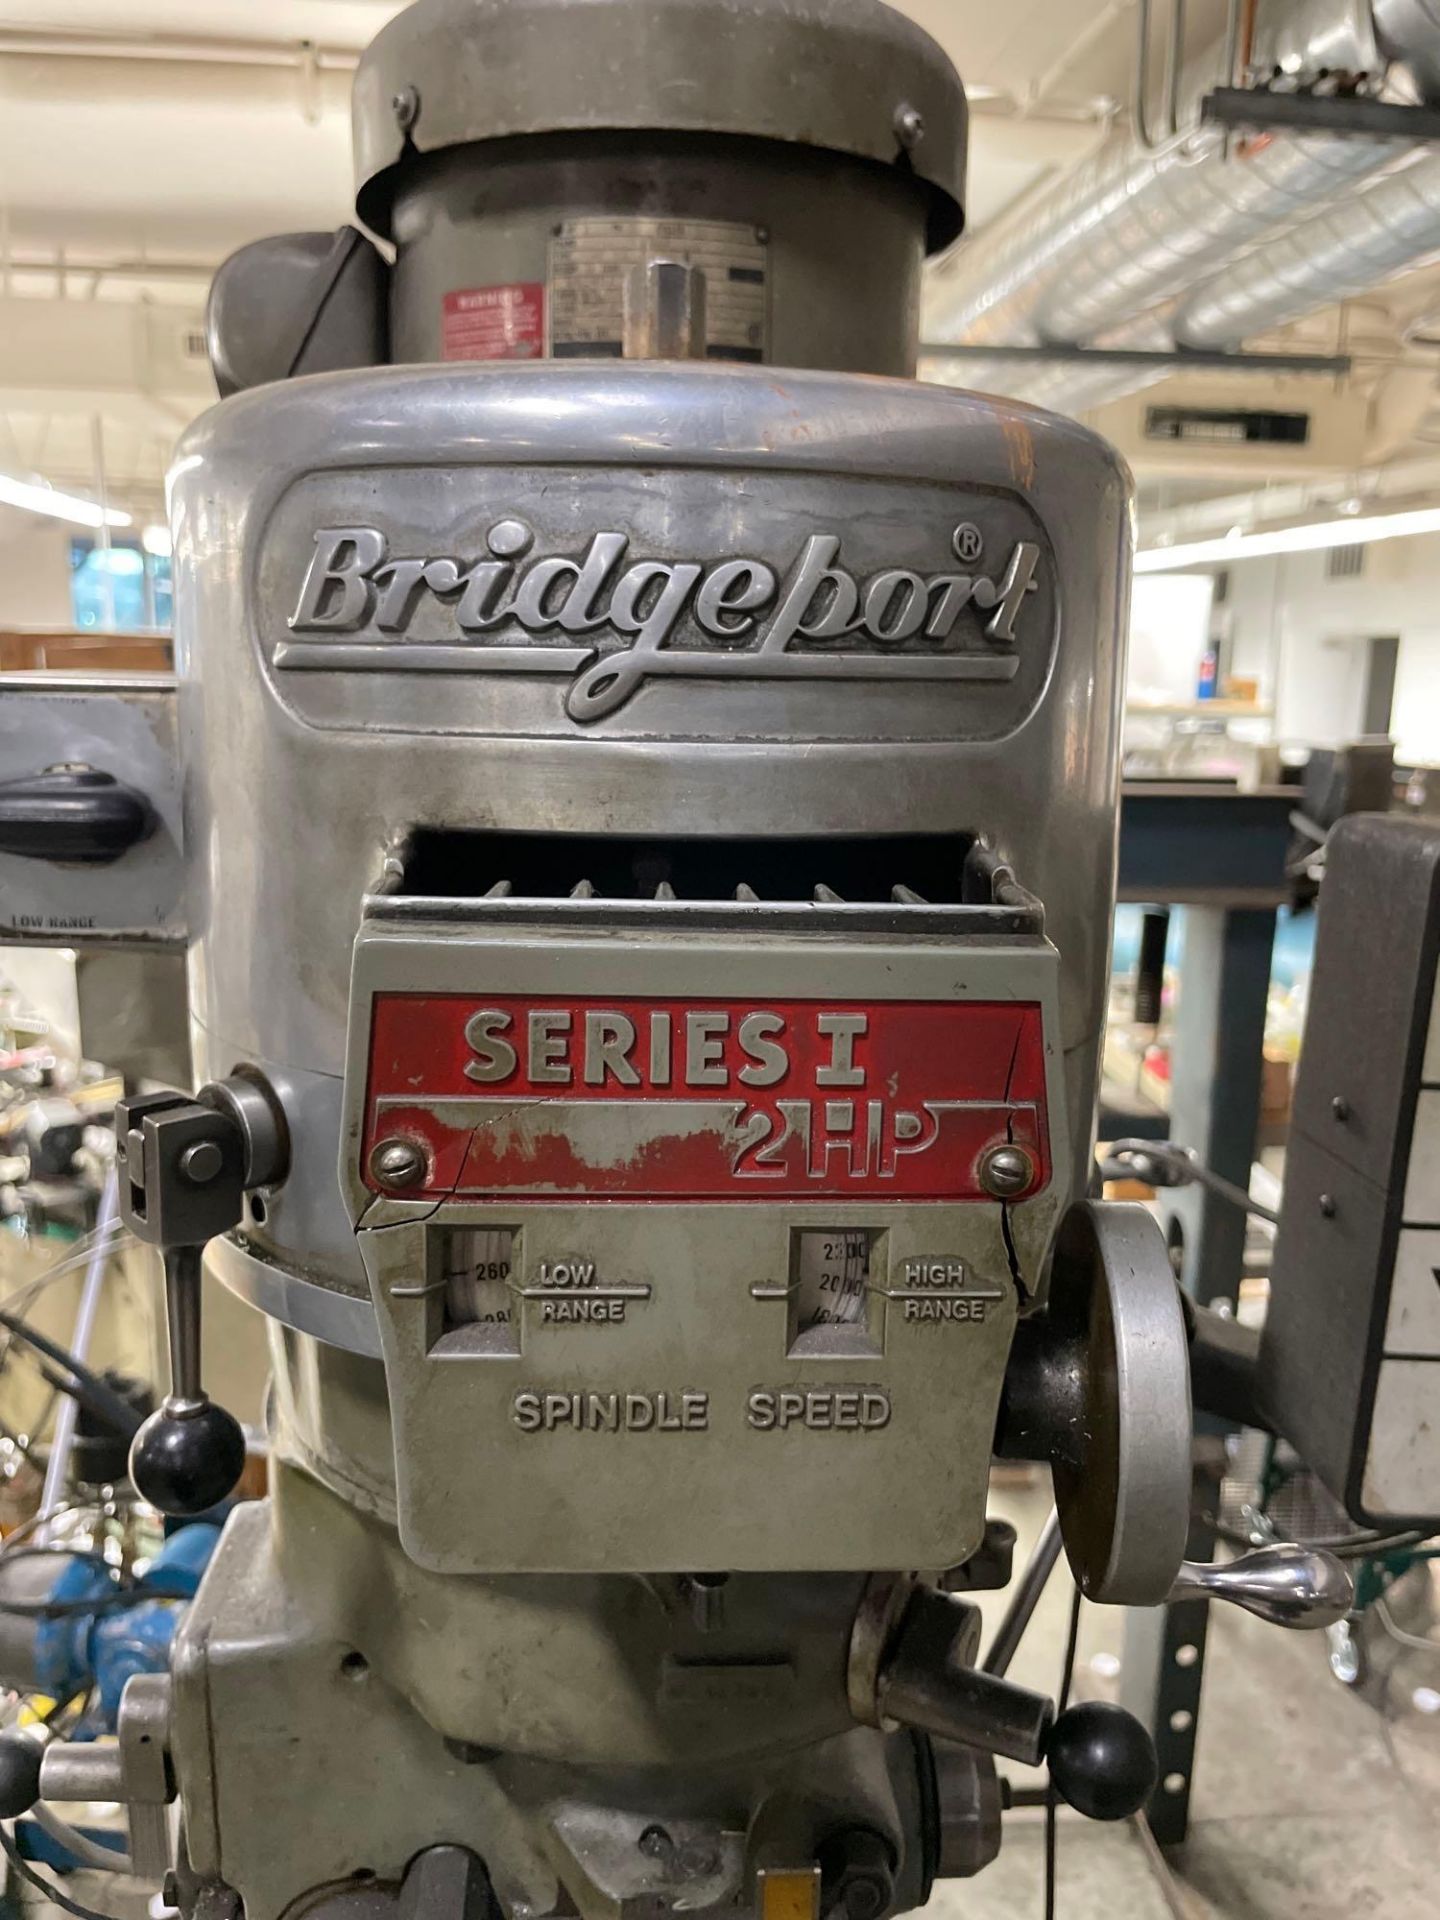 Bridgeport Series 1 Vertical Mill, 2 HP, 9" x 42" Table, Sargon D.R.O. - Image 7 of 8